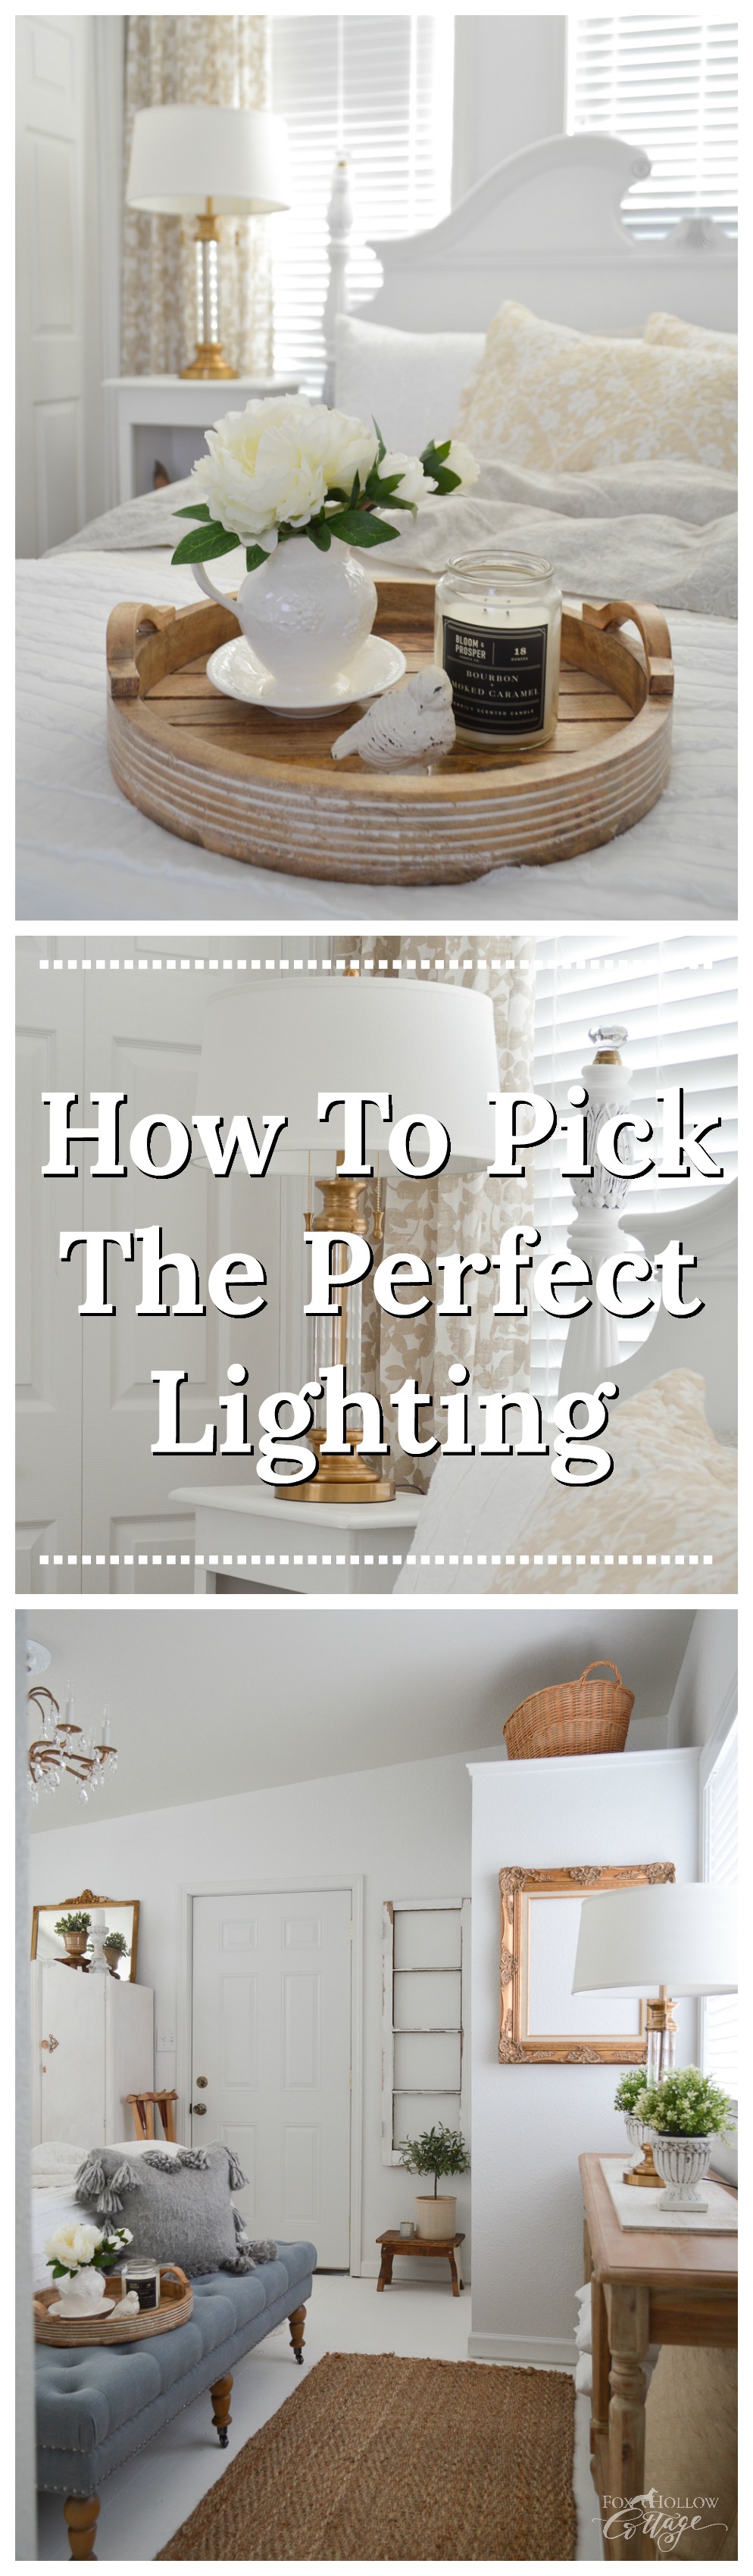 How To Pick The Perfect Lighting - Light Fixture Guidelines & Tips at www.foxhollowcottage.com #sponsored with Lamps Plus 